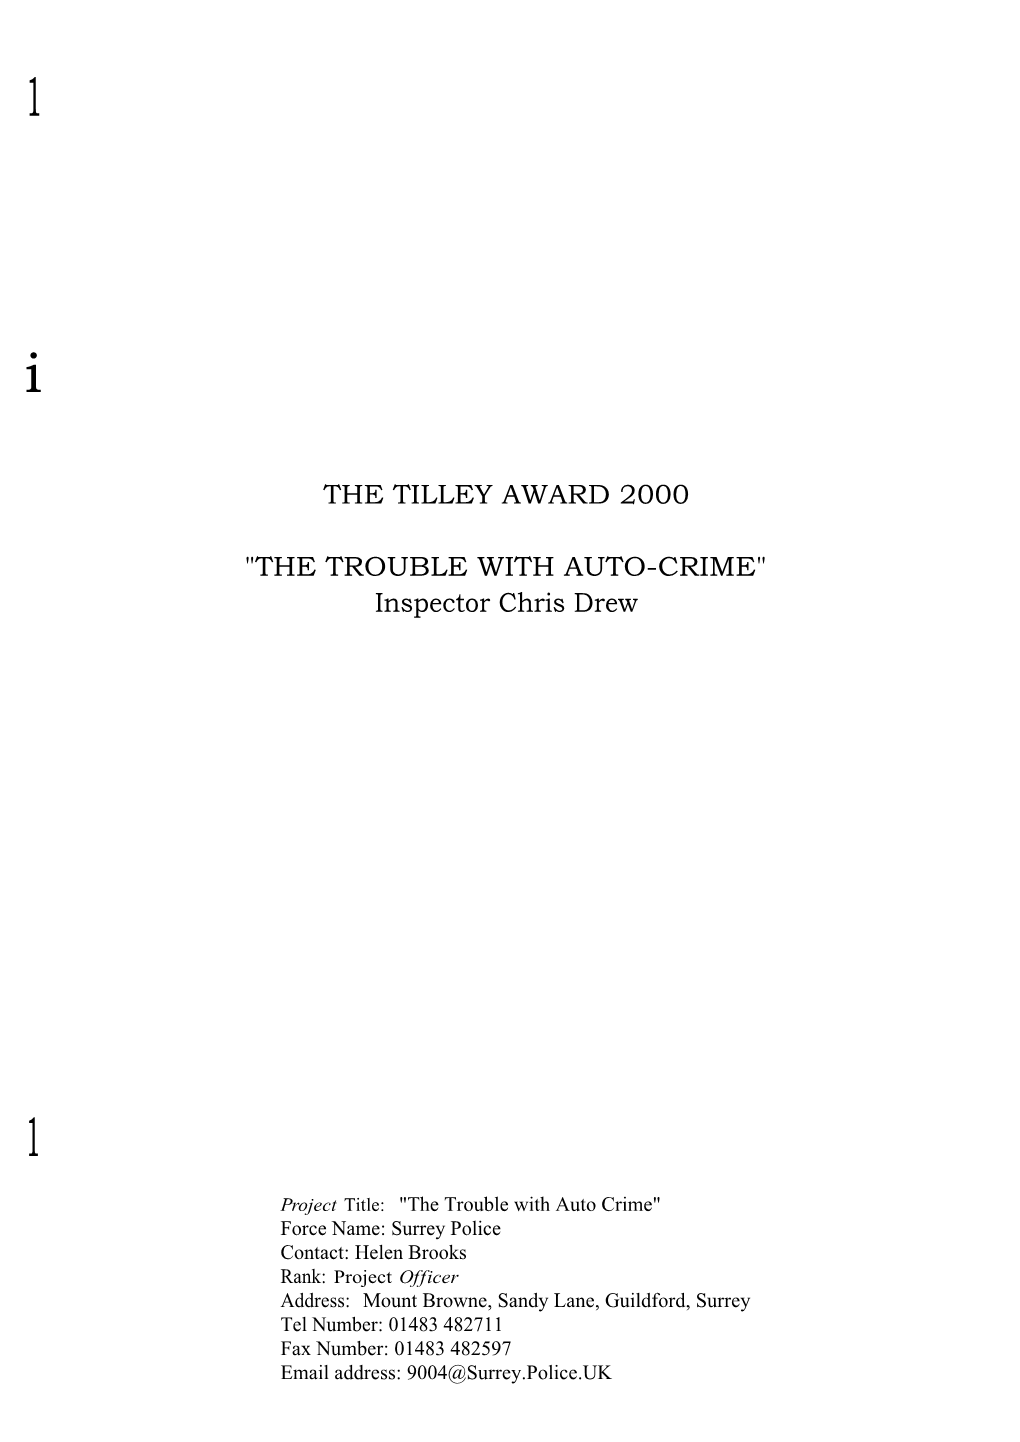 The Tilley Award 2000 "The Trouble with Auto-Crime